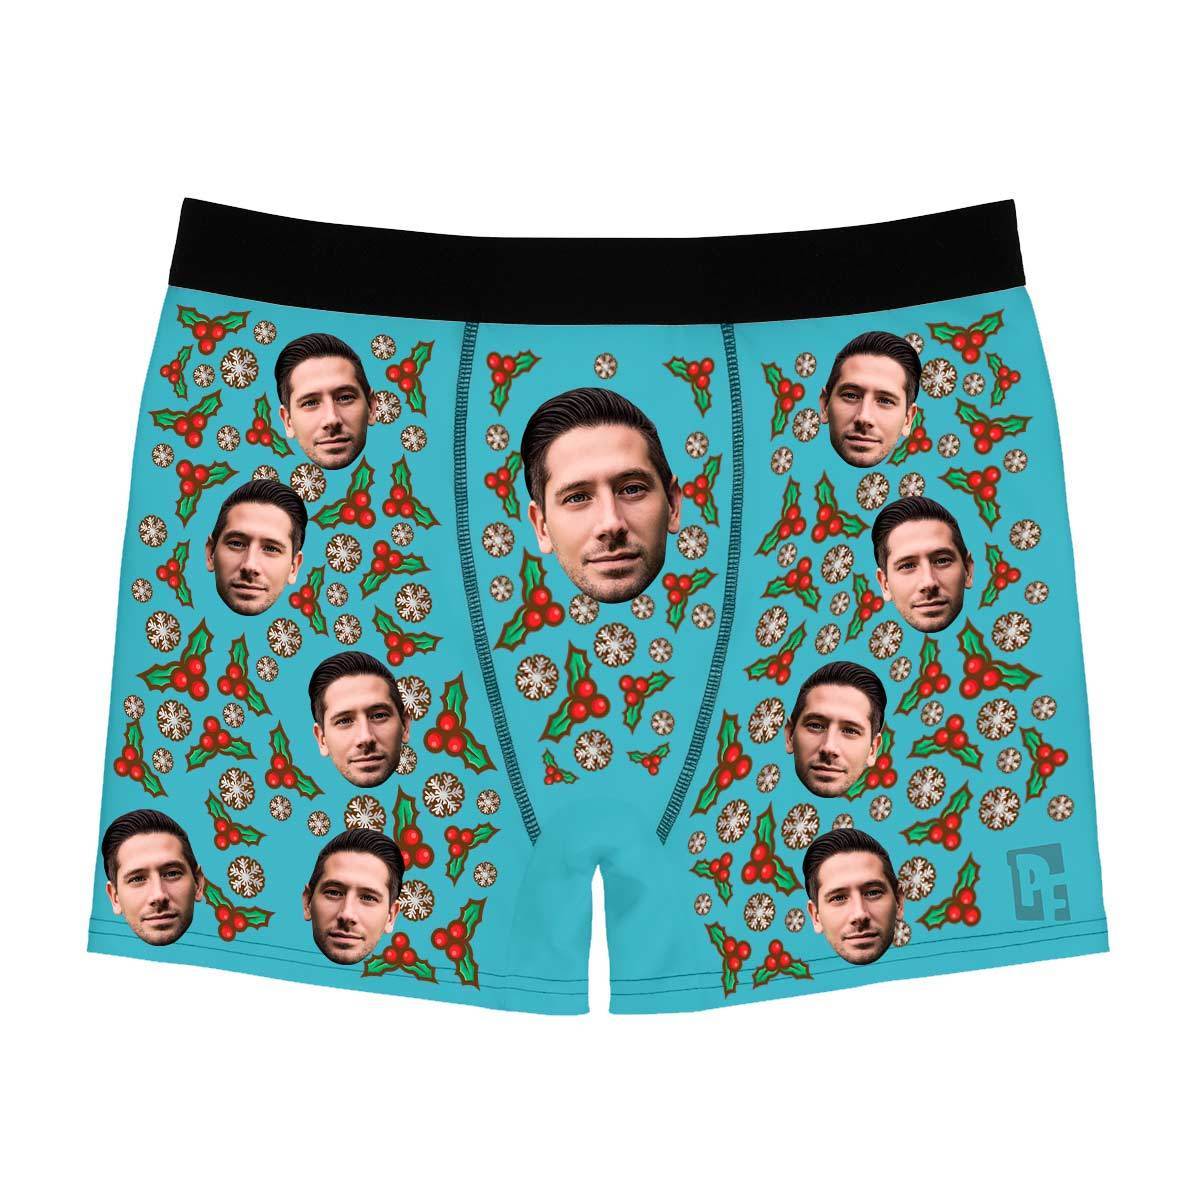 Blue Mistletoe men's boxer briefs personalized with photo printed on them